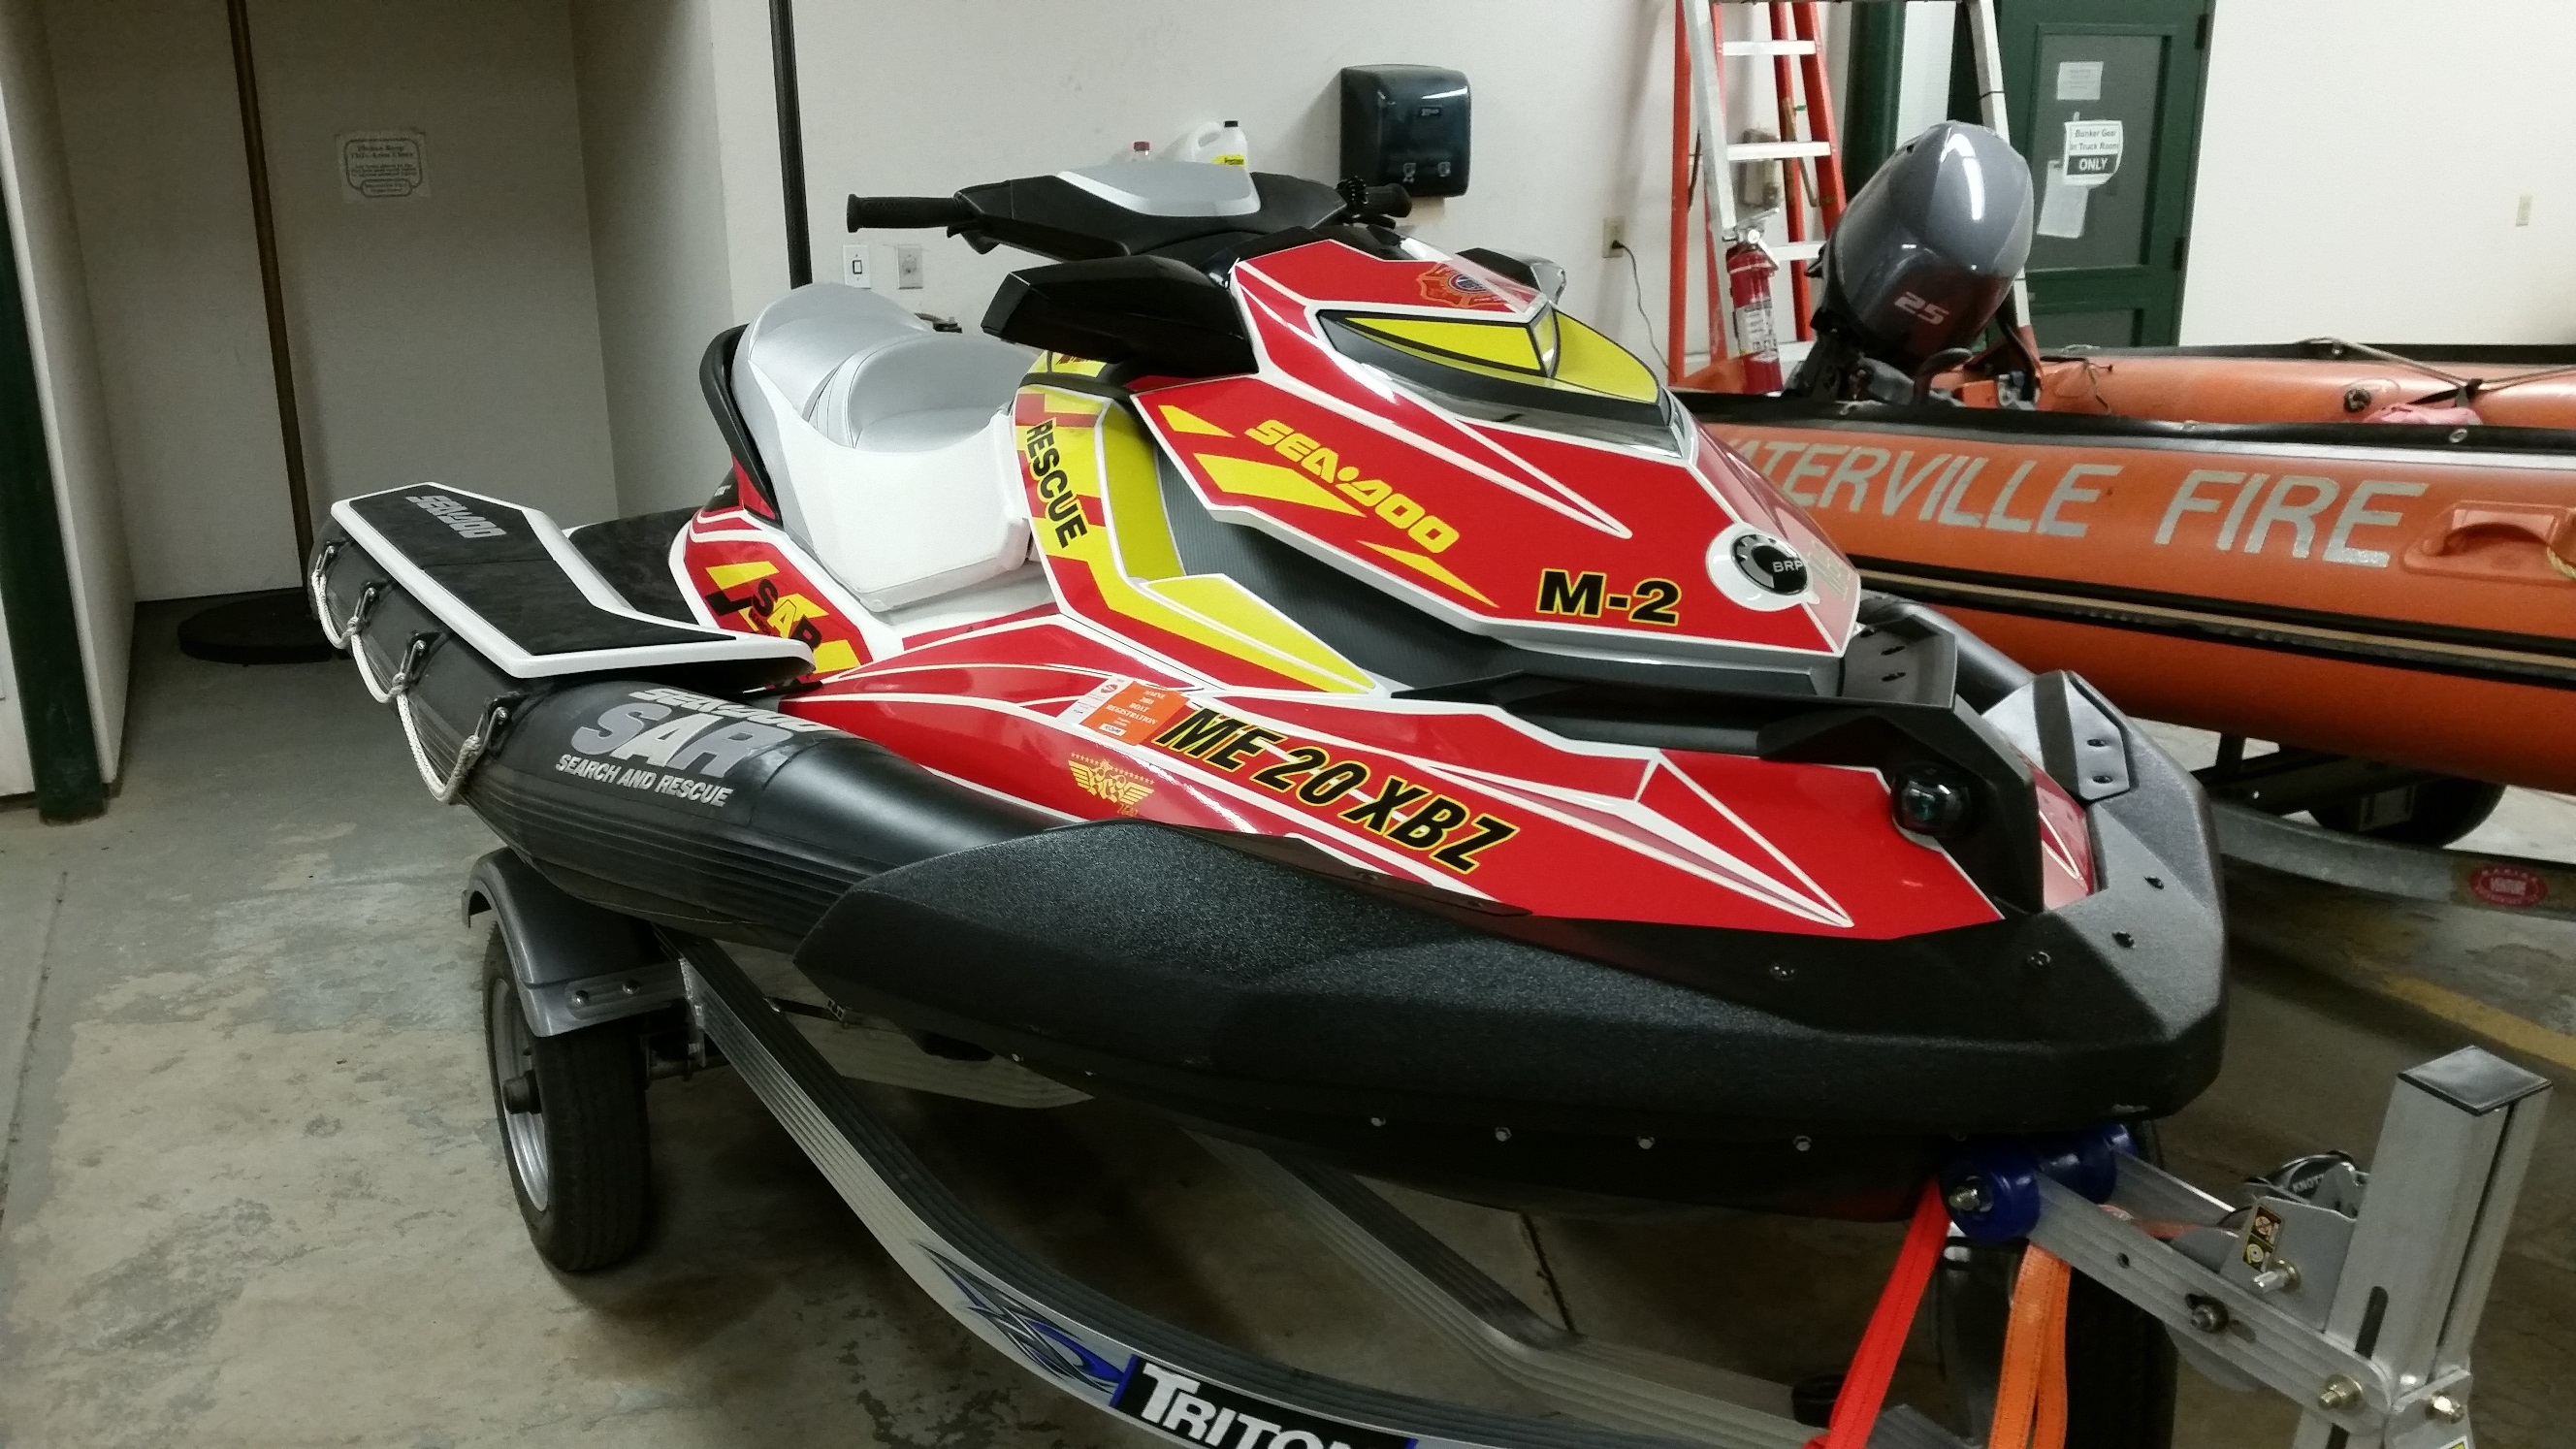 Picture of the left side front Search and Rescue (SAR) jet ski